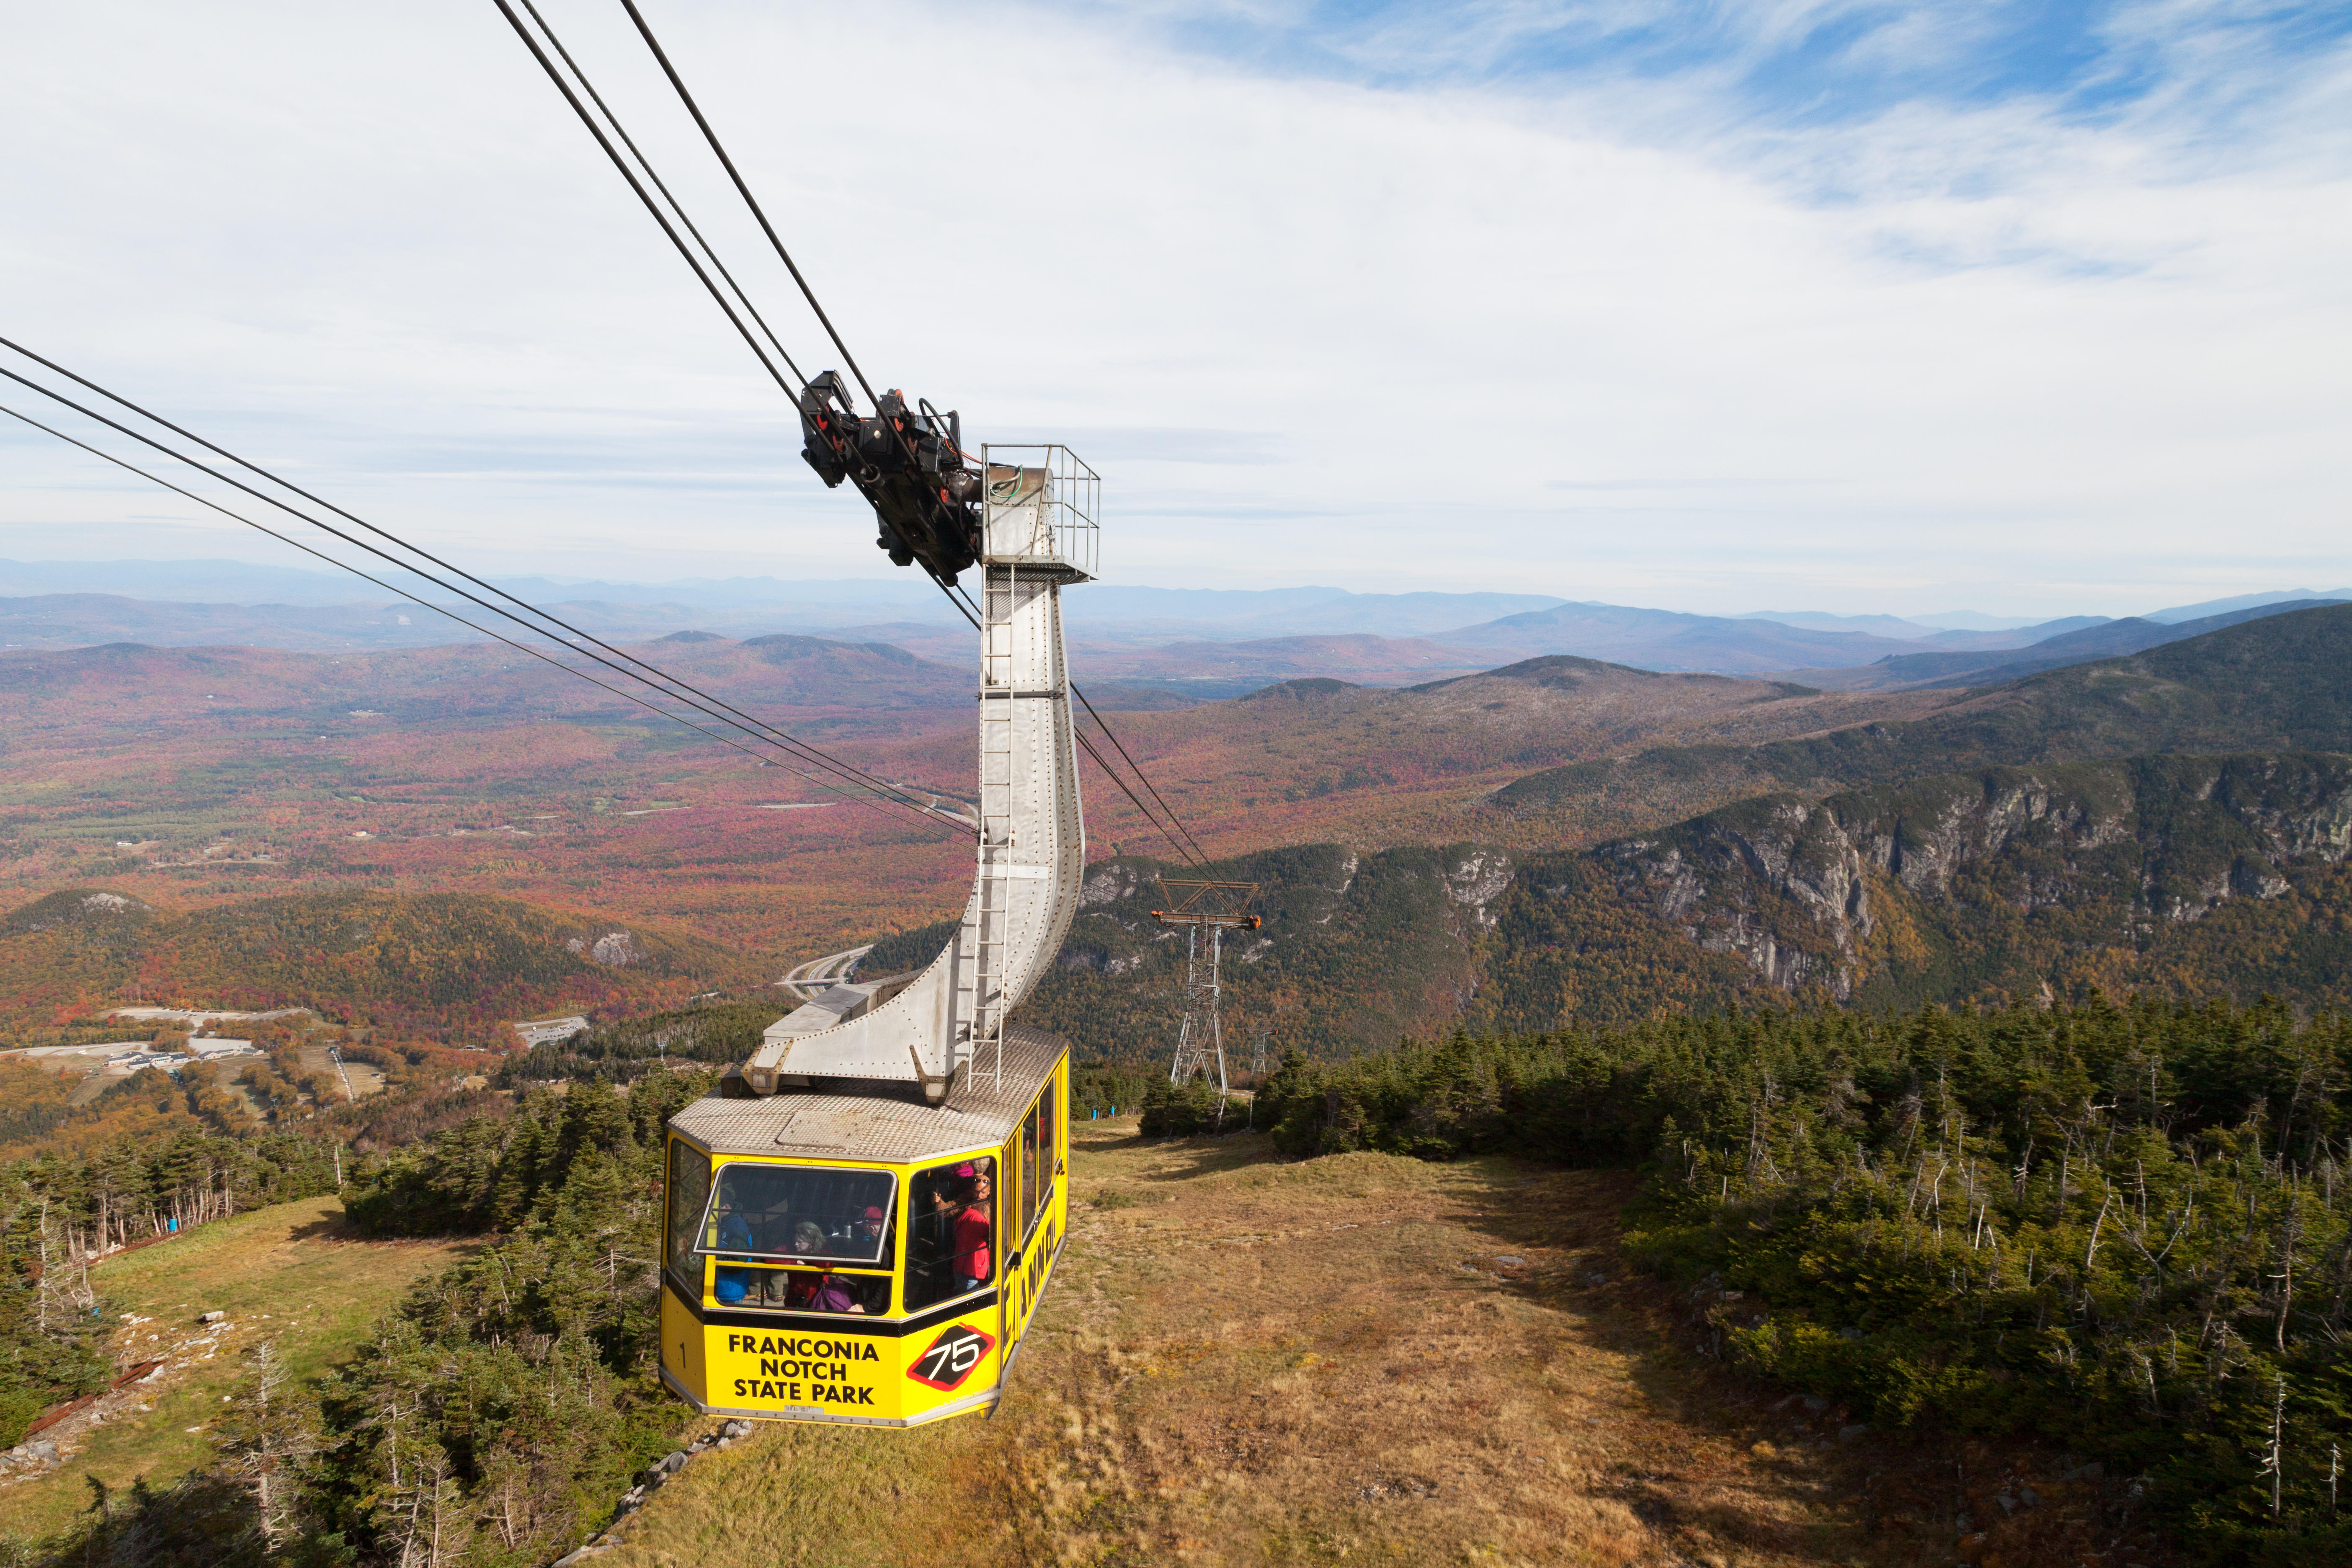 The Cannon Mountain Aerial Tramway or Cable Car, Franconia Notch State Park, White Mountains New Hampshire USA